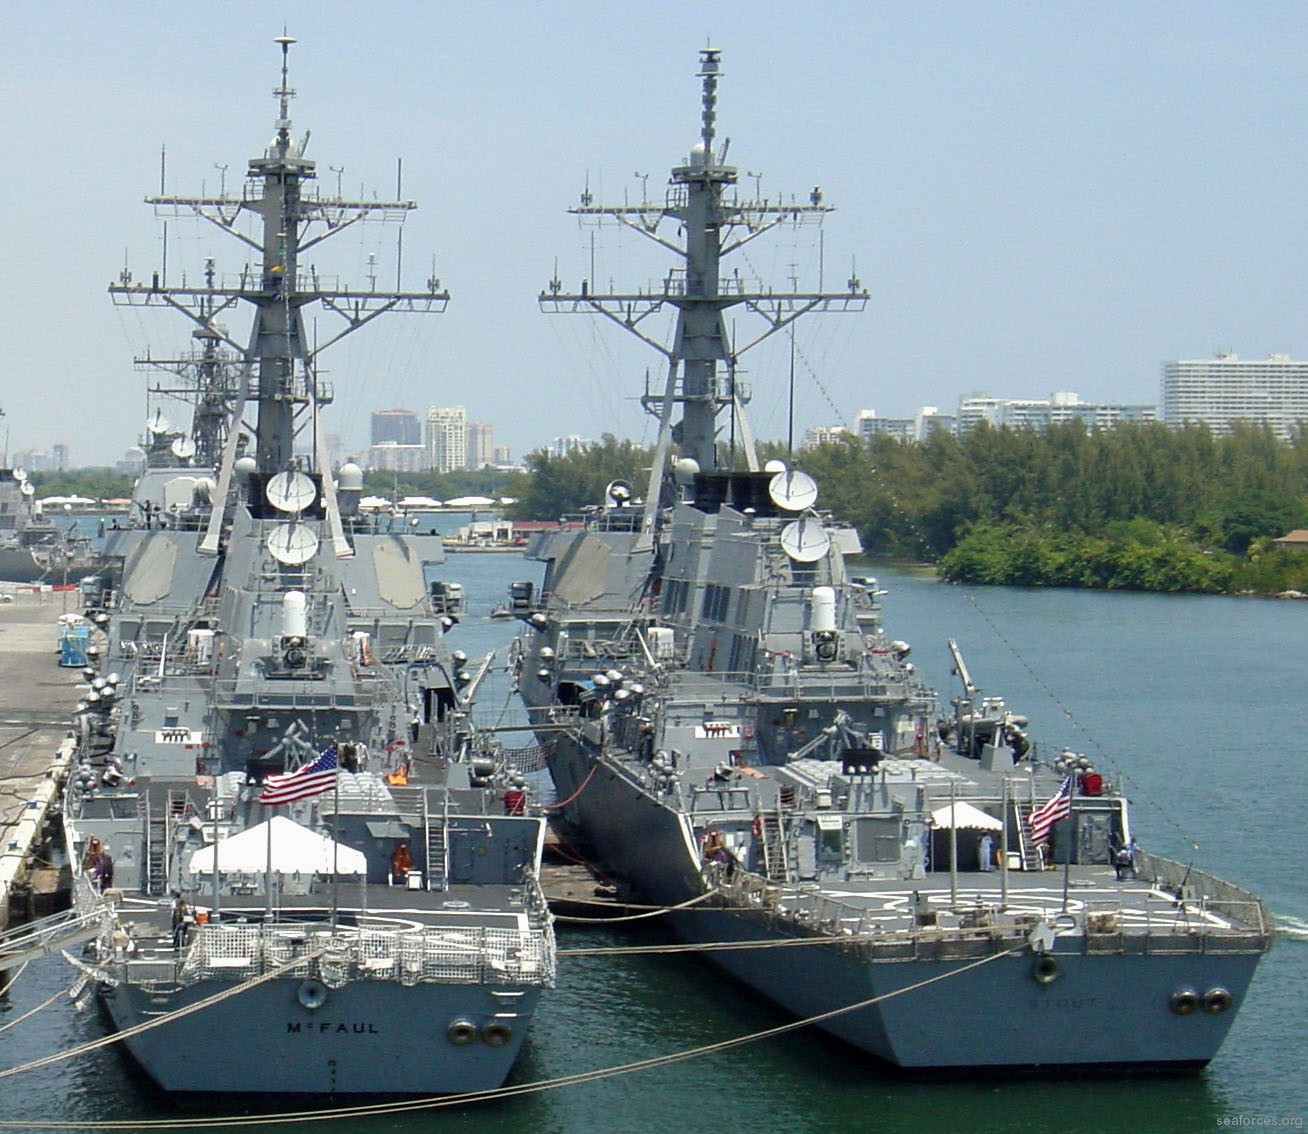 ddg-55 uss stout guided missile destroyer us navy 90 fort lauderdale